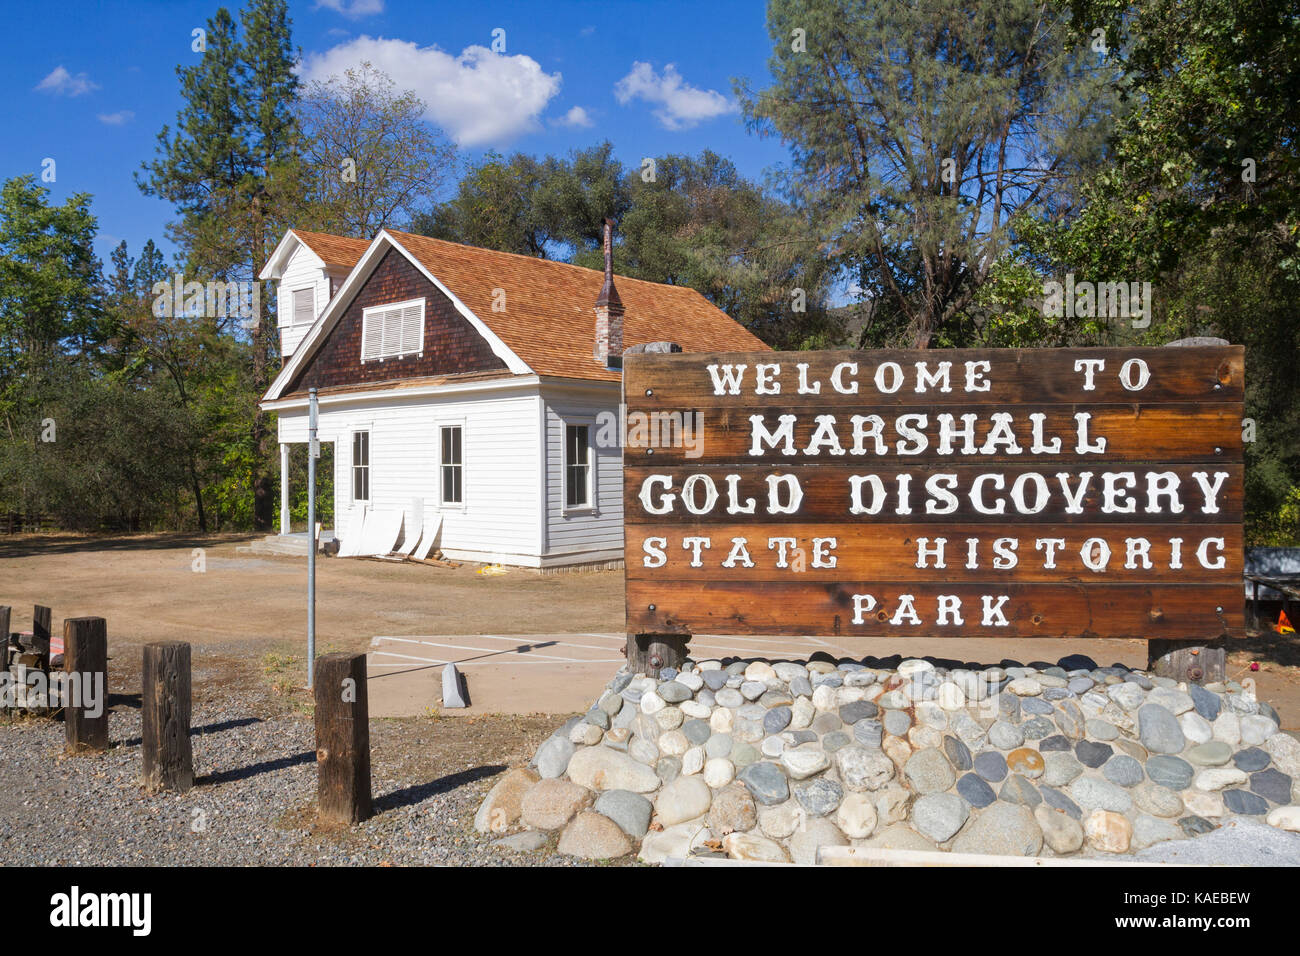 États-unis, Californie, Coloma, Marshall Gold Discovery State Historic Park Banque D'Images